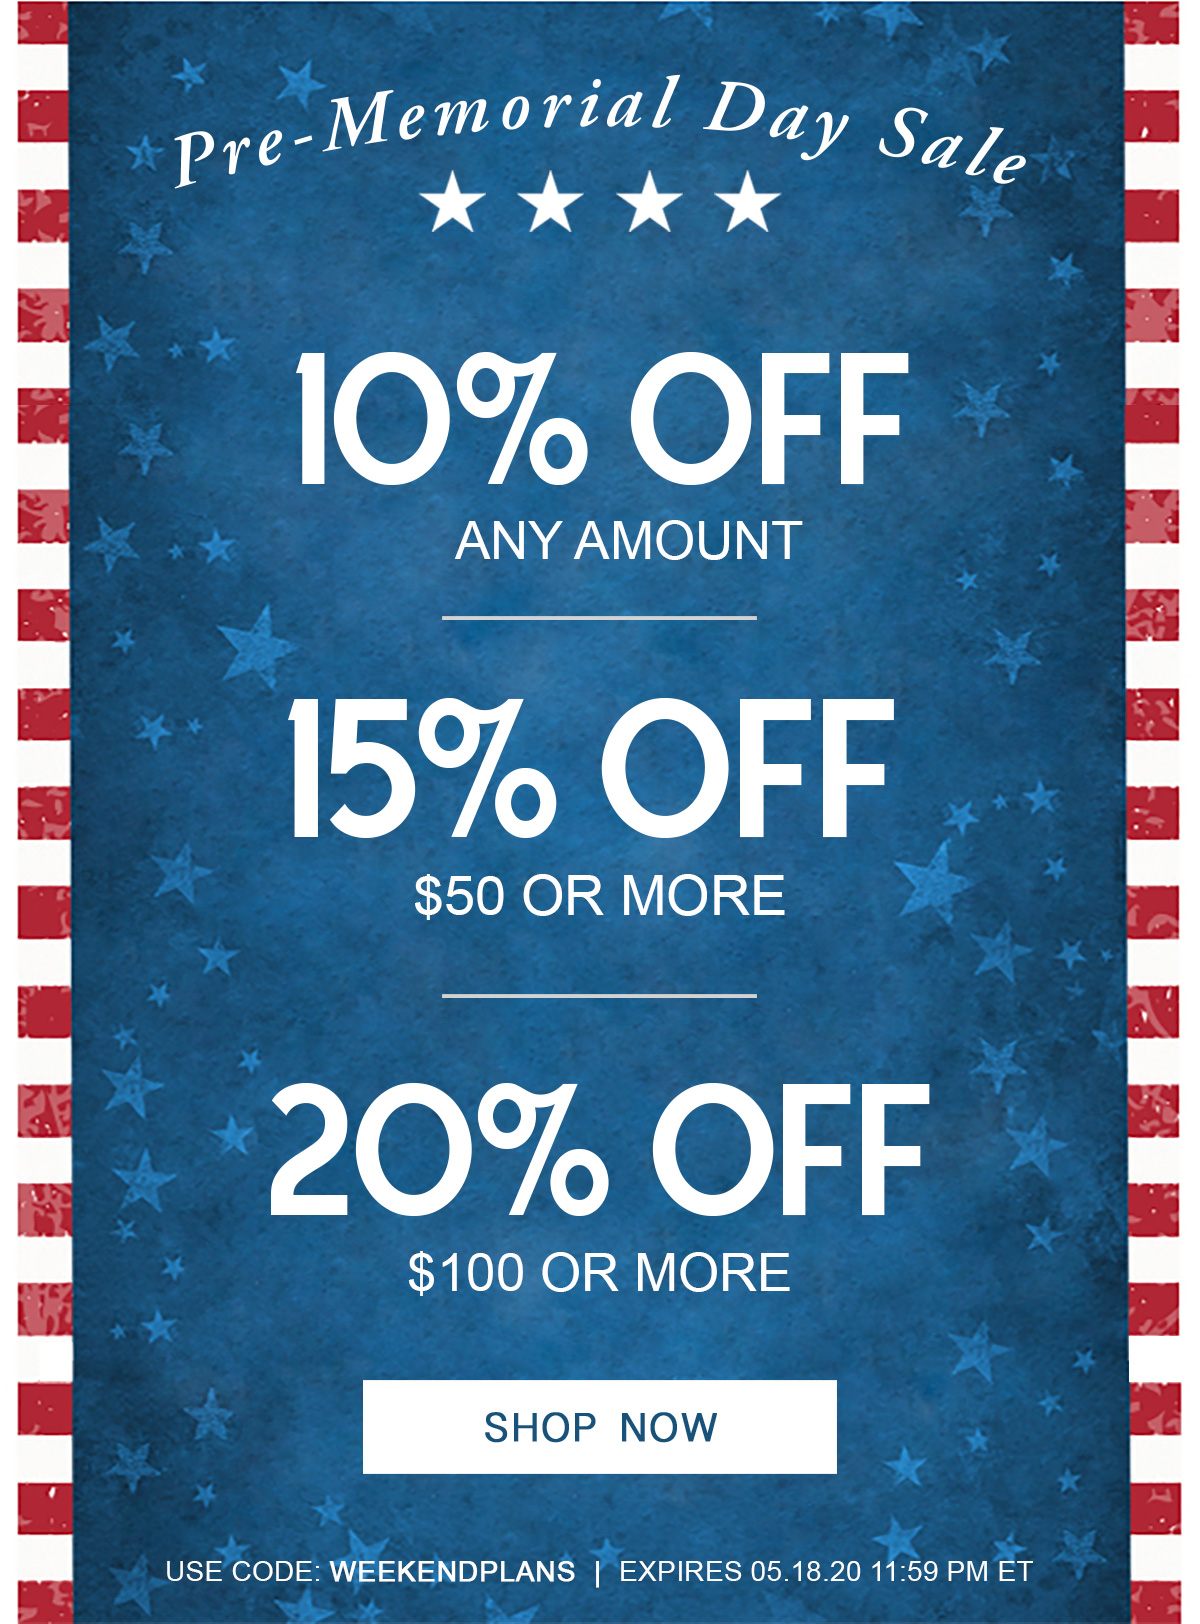 Pre-Memorial Day Sale  10% Off Any Amount  15% Off $50 or More  20% Off $100 or More  Shop Now   Use code: WEEKENDPLANS |  Expires 05.18.20 11:59 PM ET